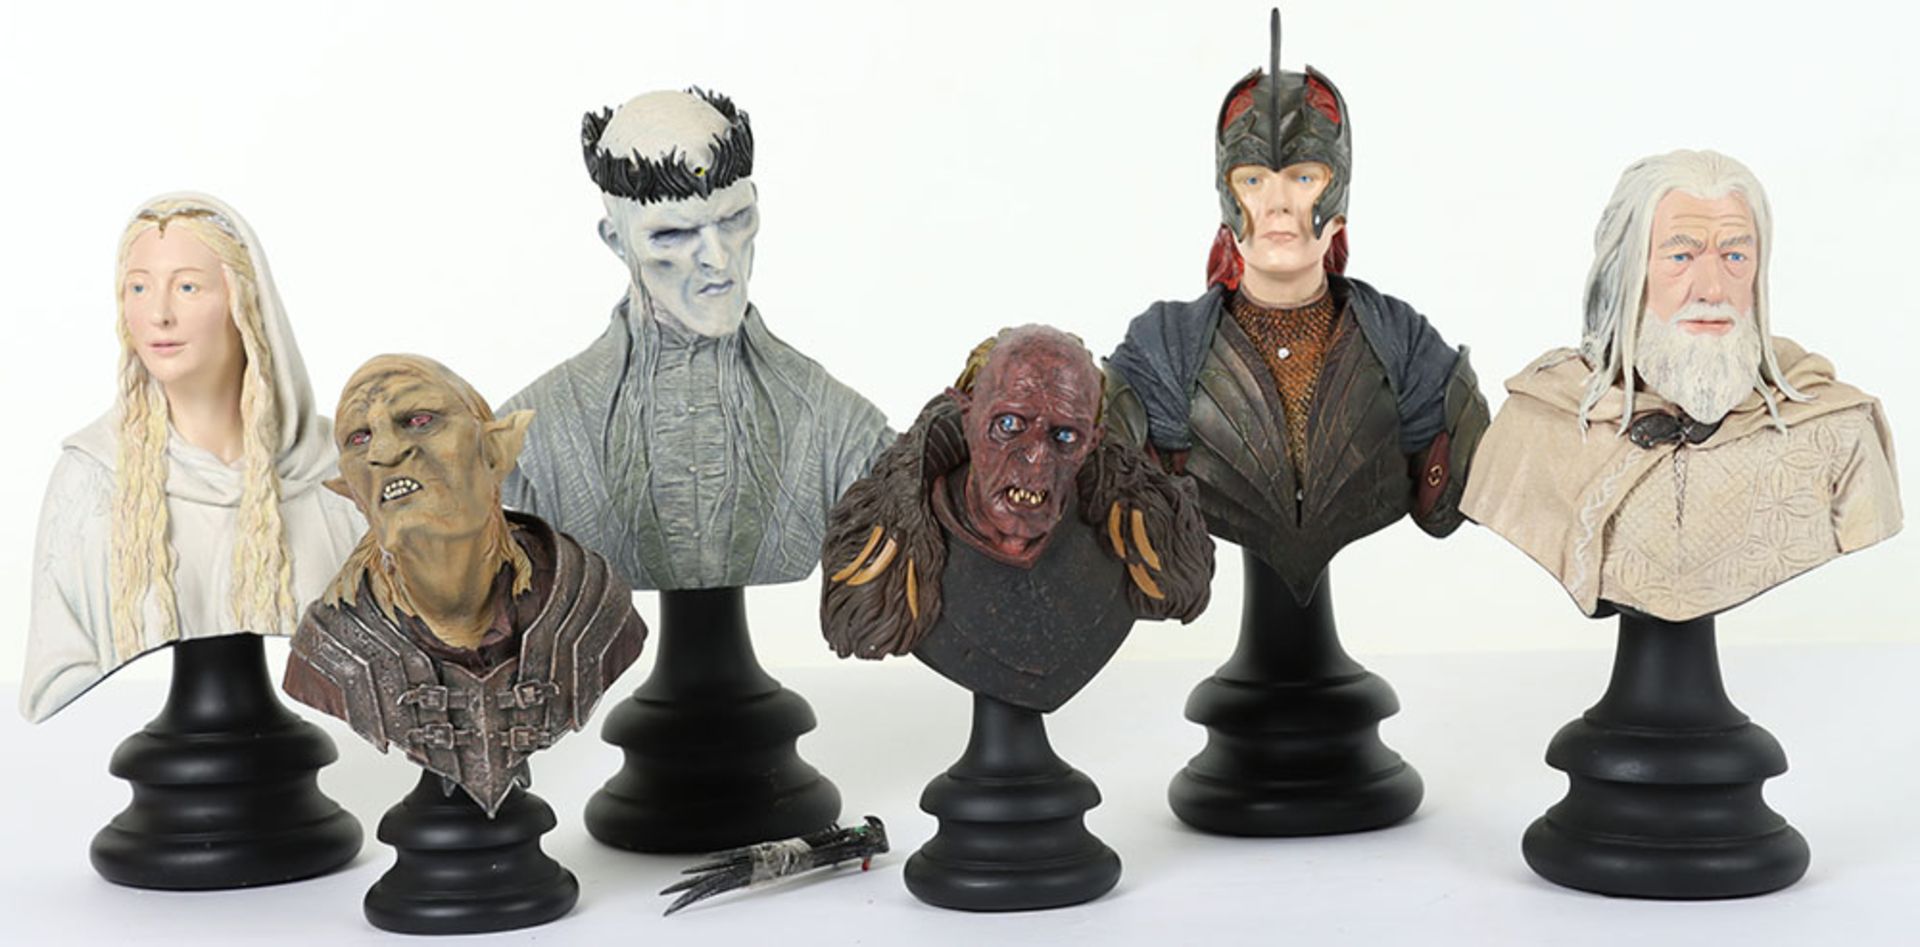 Sideshow Weta Lord of The Rings Collectable Busts - Image 2 of 10